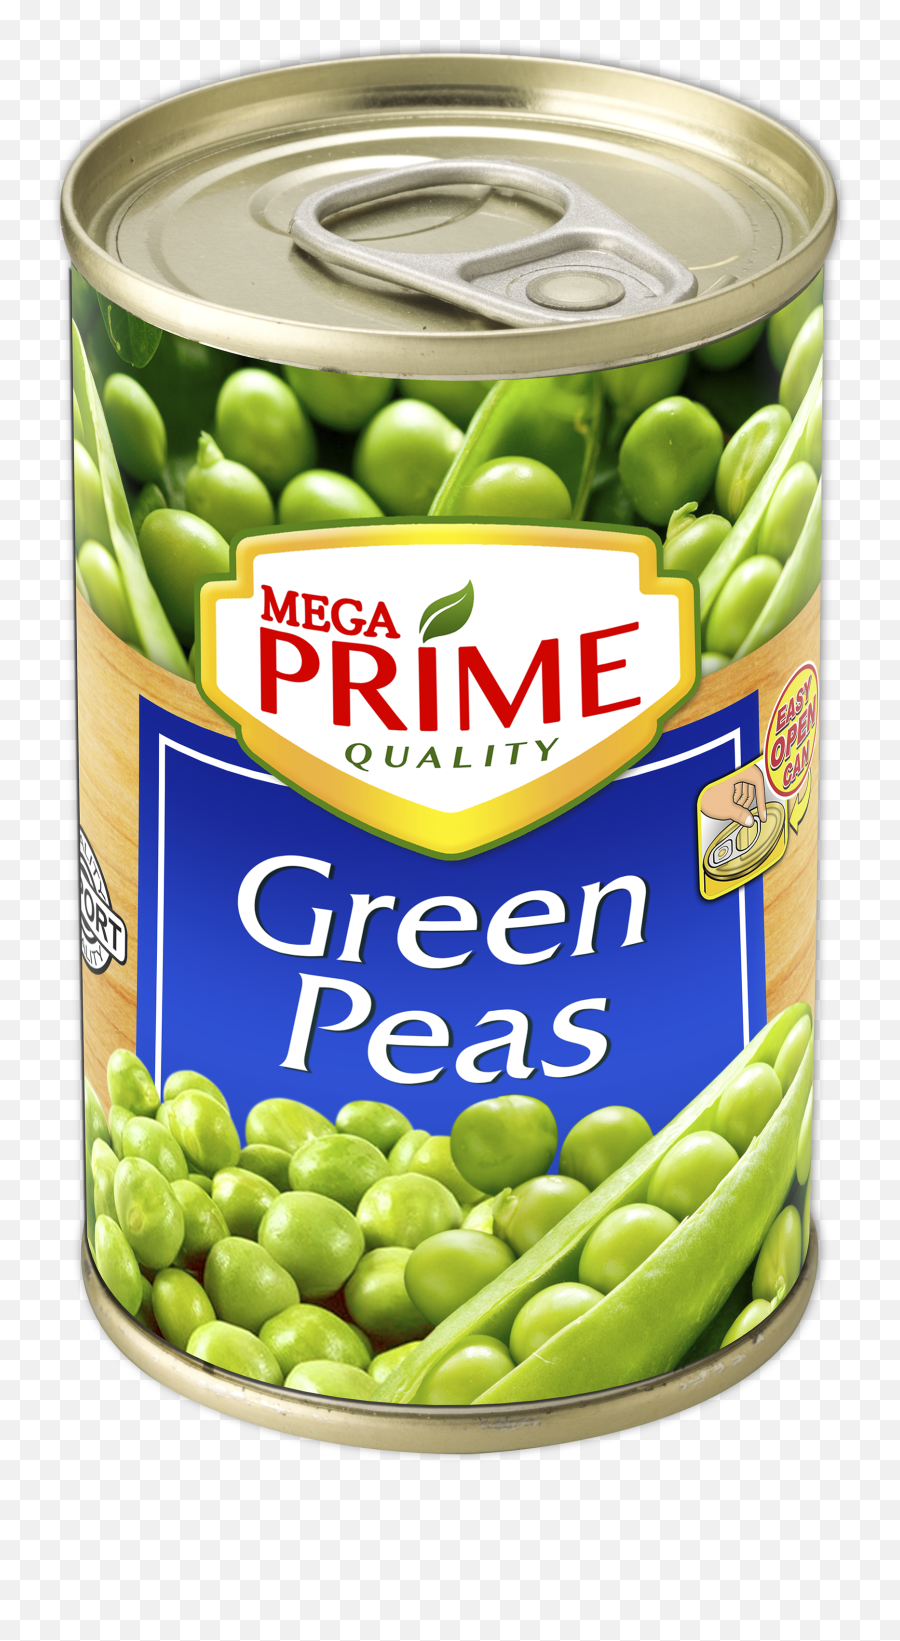 Mega Prime Green Peas 155g Global Corporation - Cream Style Corn In Can Png,Peas Png